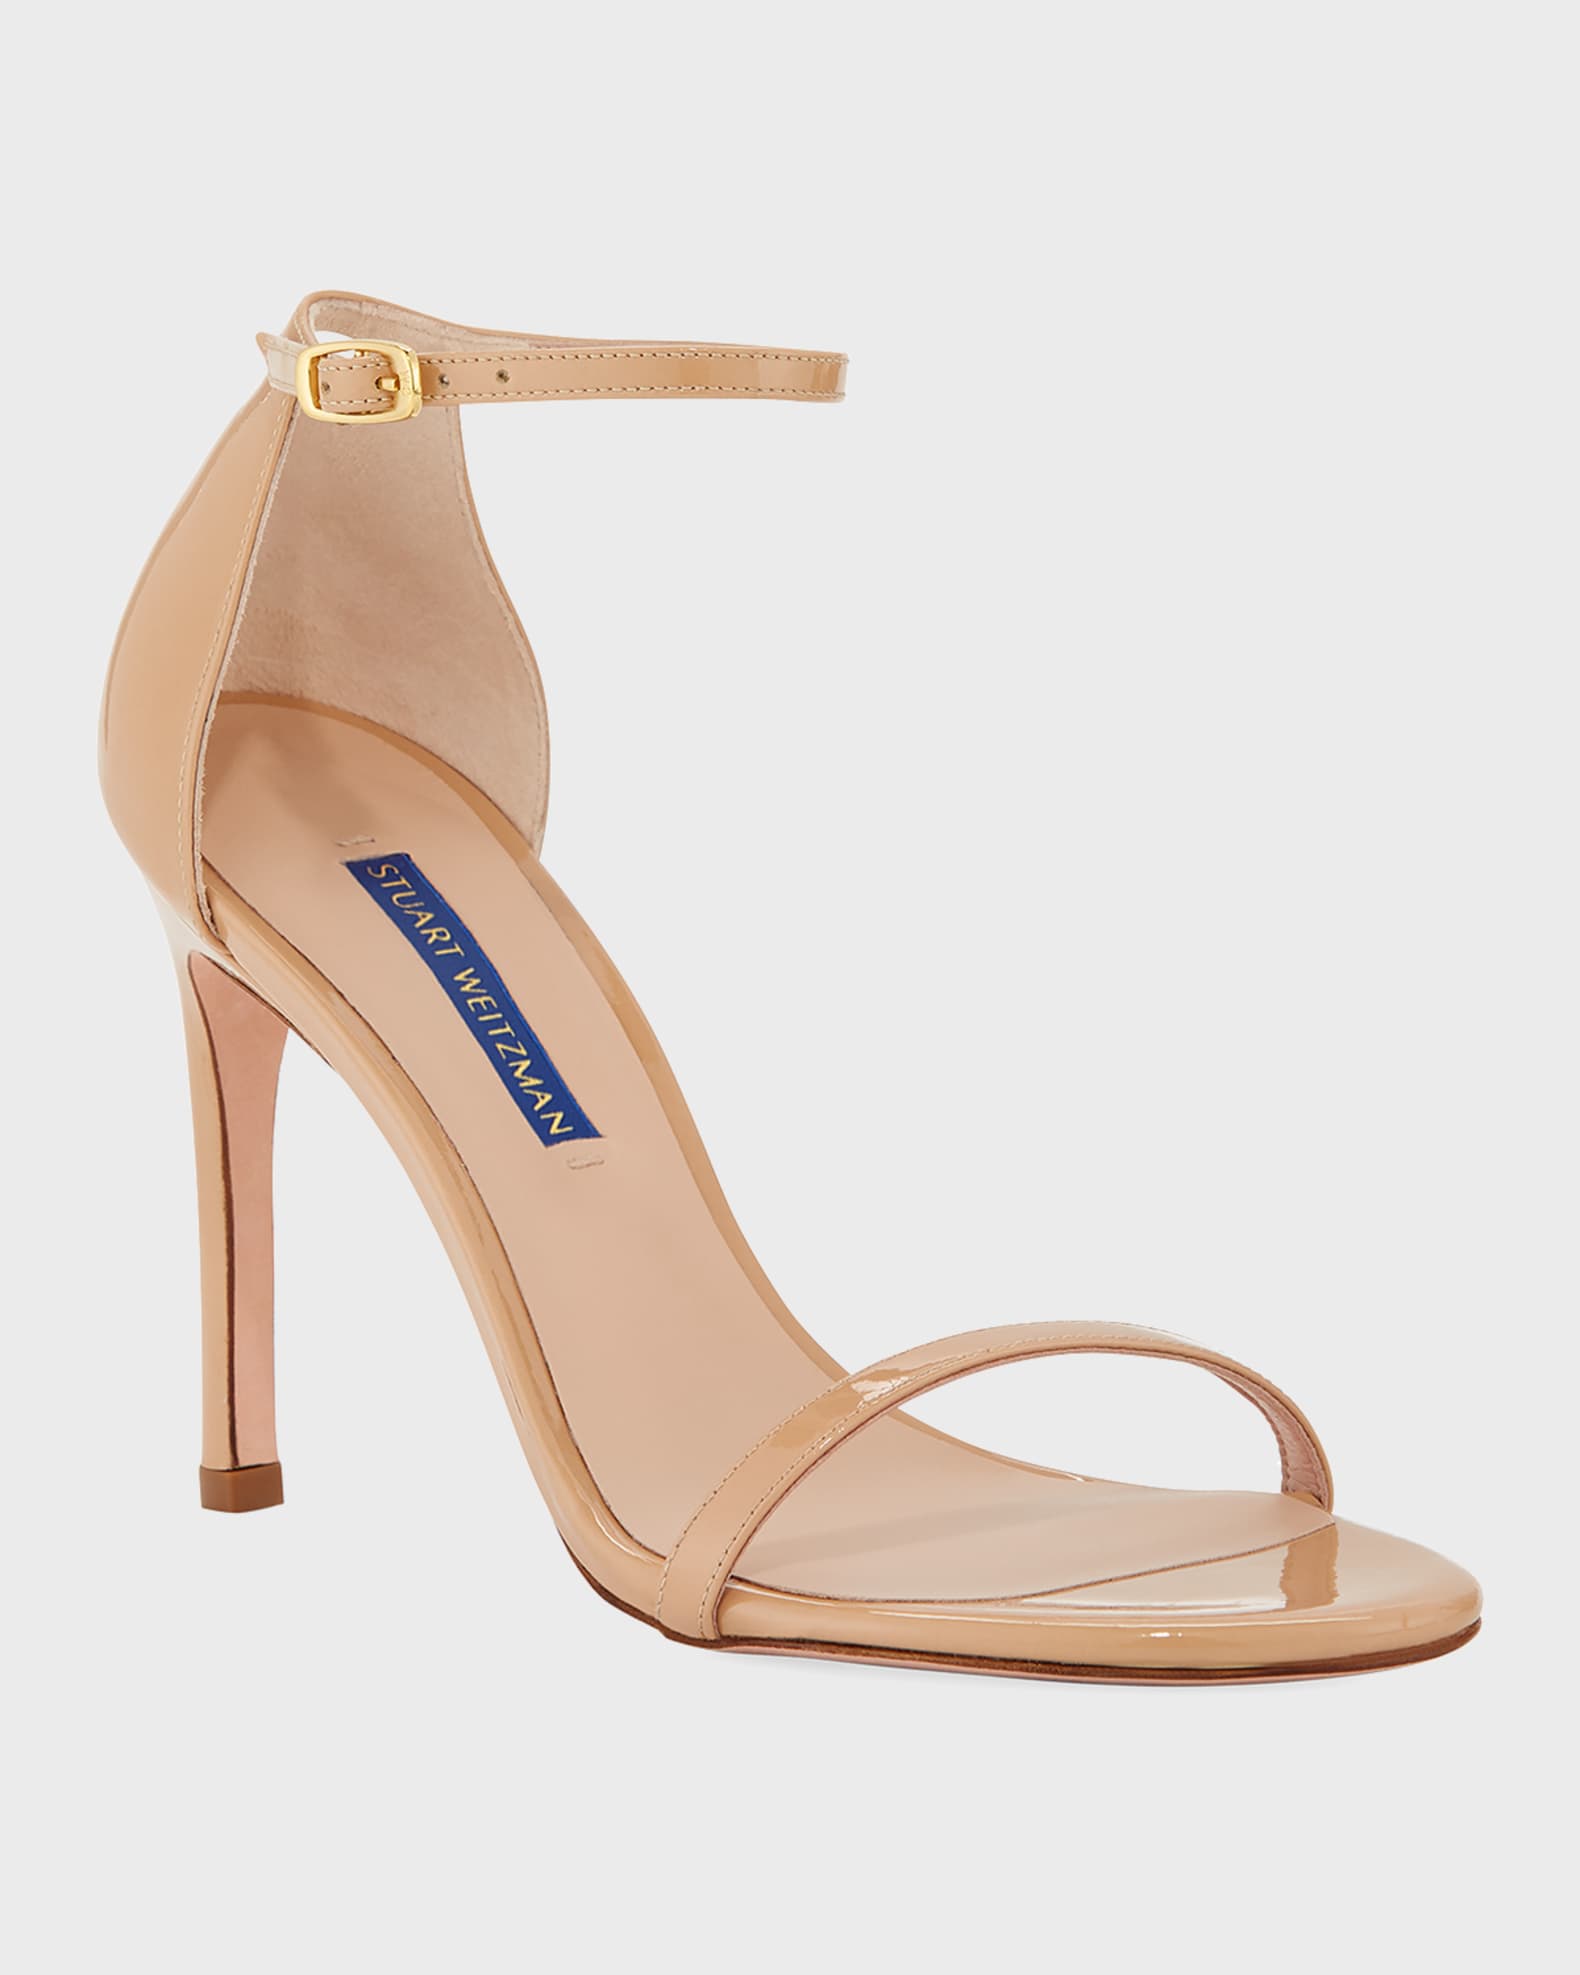 Nudistsong Patent Ankle-Wrap High-Heel Sandals | Neiman Marcus